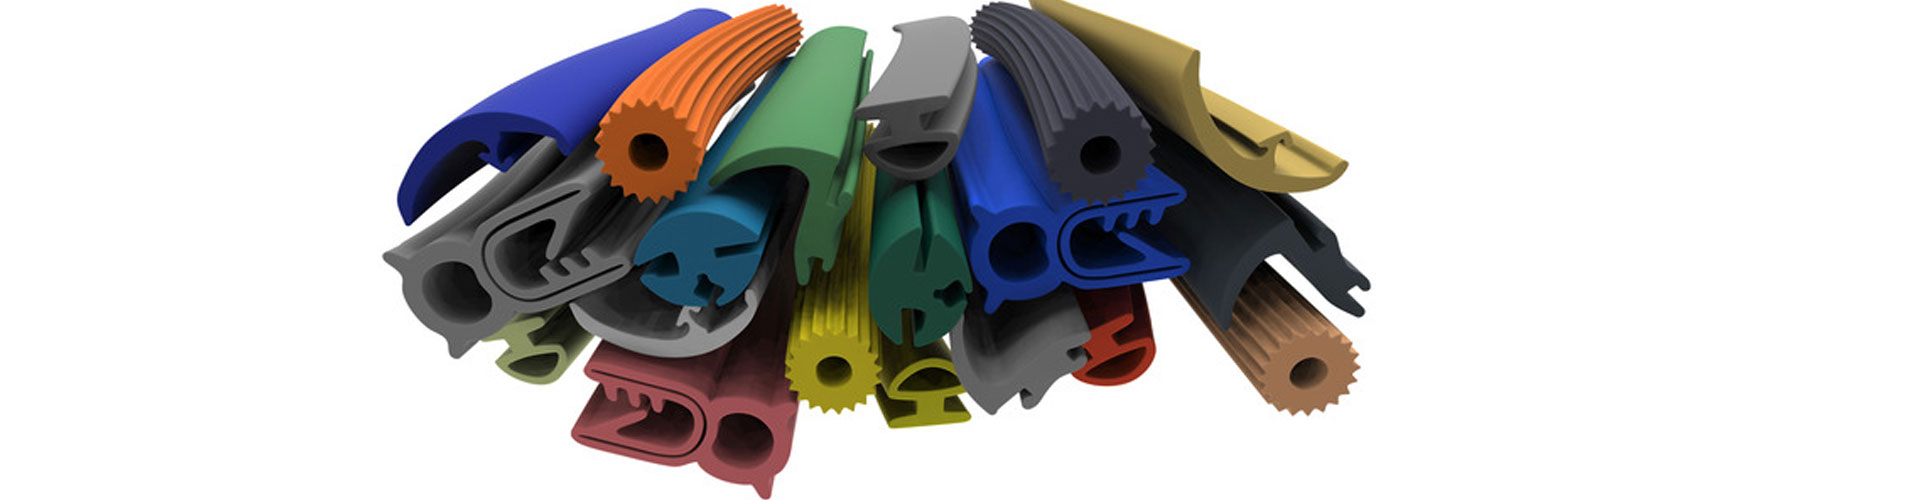 Rubber Extrusions for Comdaco Rubber Manufacturing Services in Kansas City Missouri